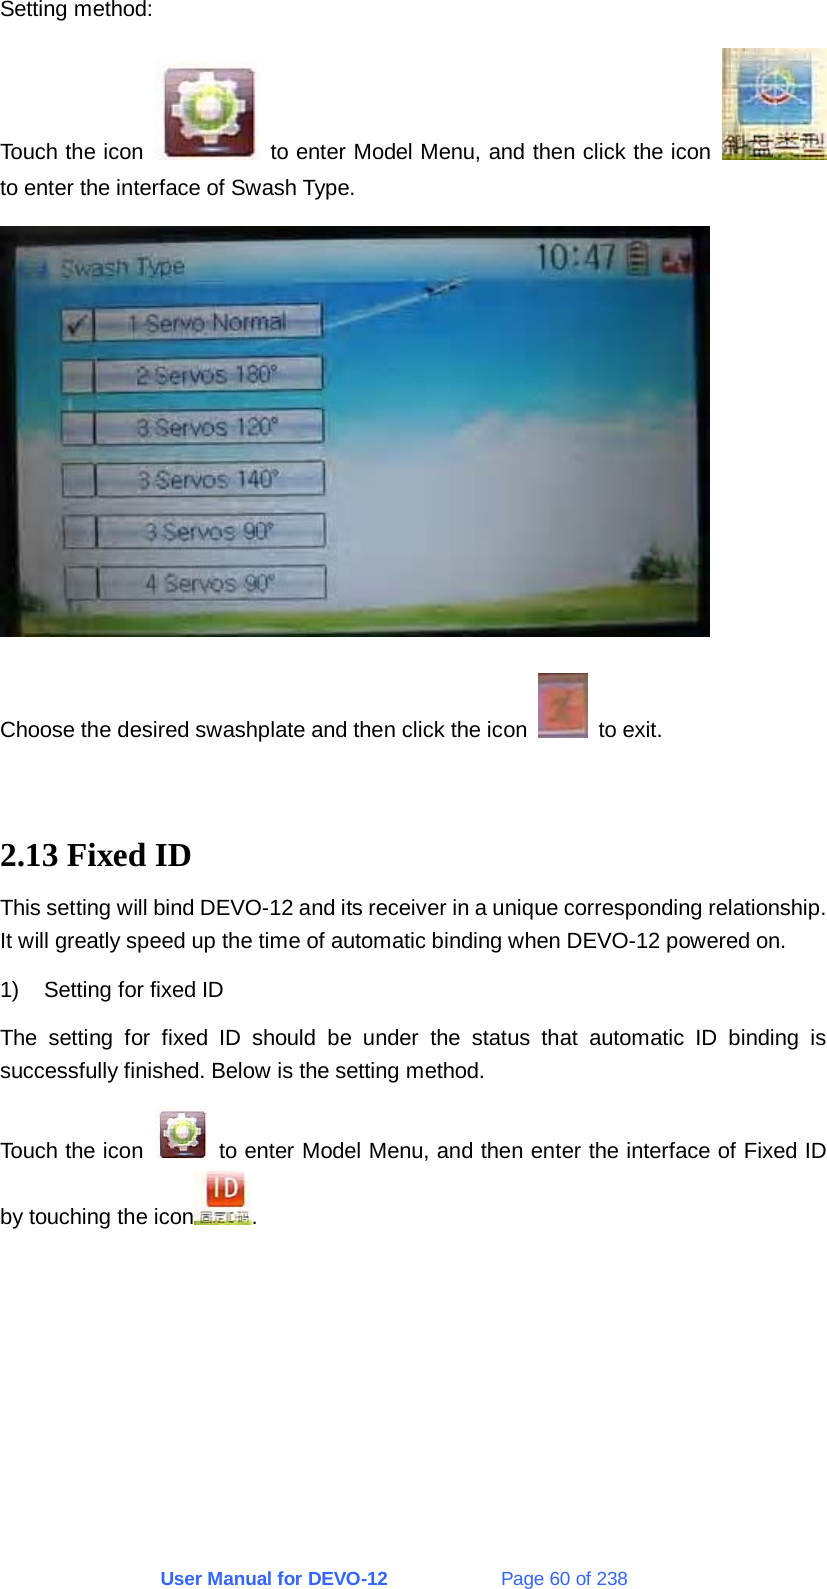 User Manual for DEVO-12             Page 60 of 238 Setting method:   Touch the icon    to enter Model Menu, and then click the icon   to enter the interface of Swash Type.    Choose the desired swashplate and then click the icon   to exit.   2.13 Fixed ID This setting will bind DEVO-12 and its receiver in a unique corresponding relationship. It will greatly speed up the time of automatic binding when DEVO-12 powered on. 1)  Setting for fixed ID The setting for fixed ID should be under the status that automatic ID binding is successfully finished. Below is the setting method. Touch the icon    to enter Model Menu, and then enter the interface of Fixed ID by touching the icon . 